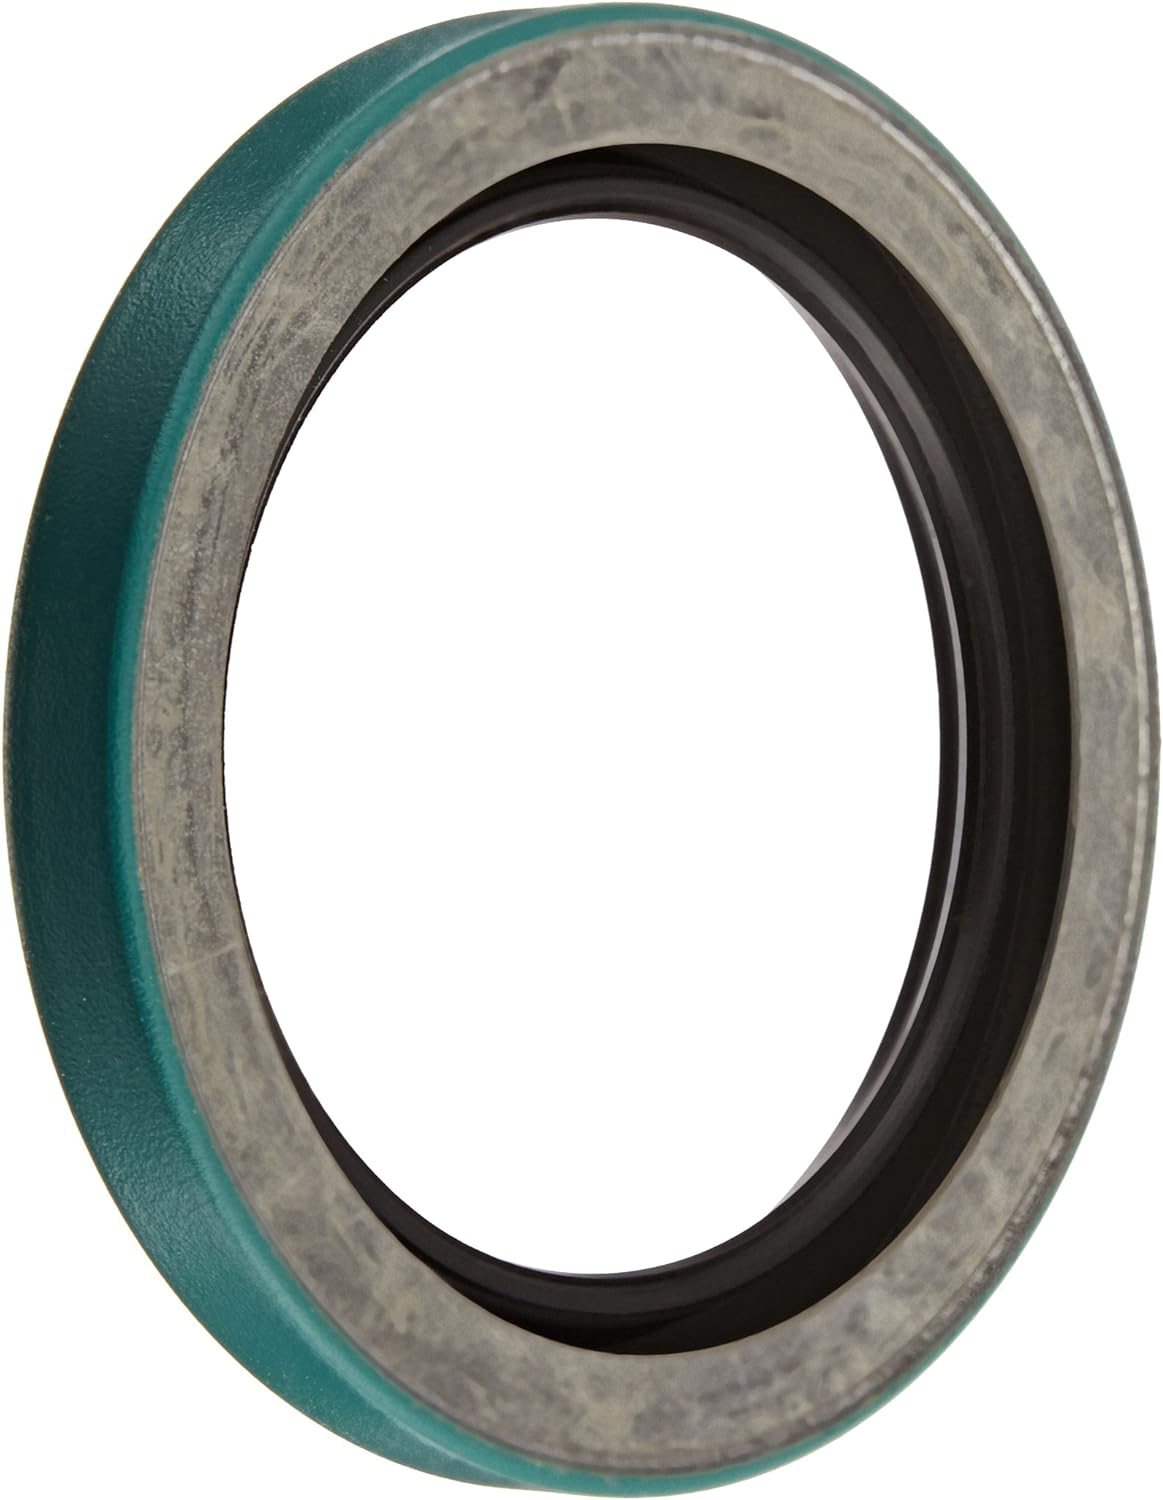 axle seal for oliver super77 / 770



replaces 1m1443